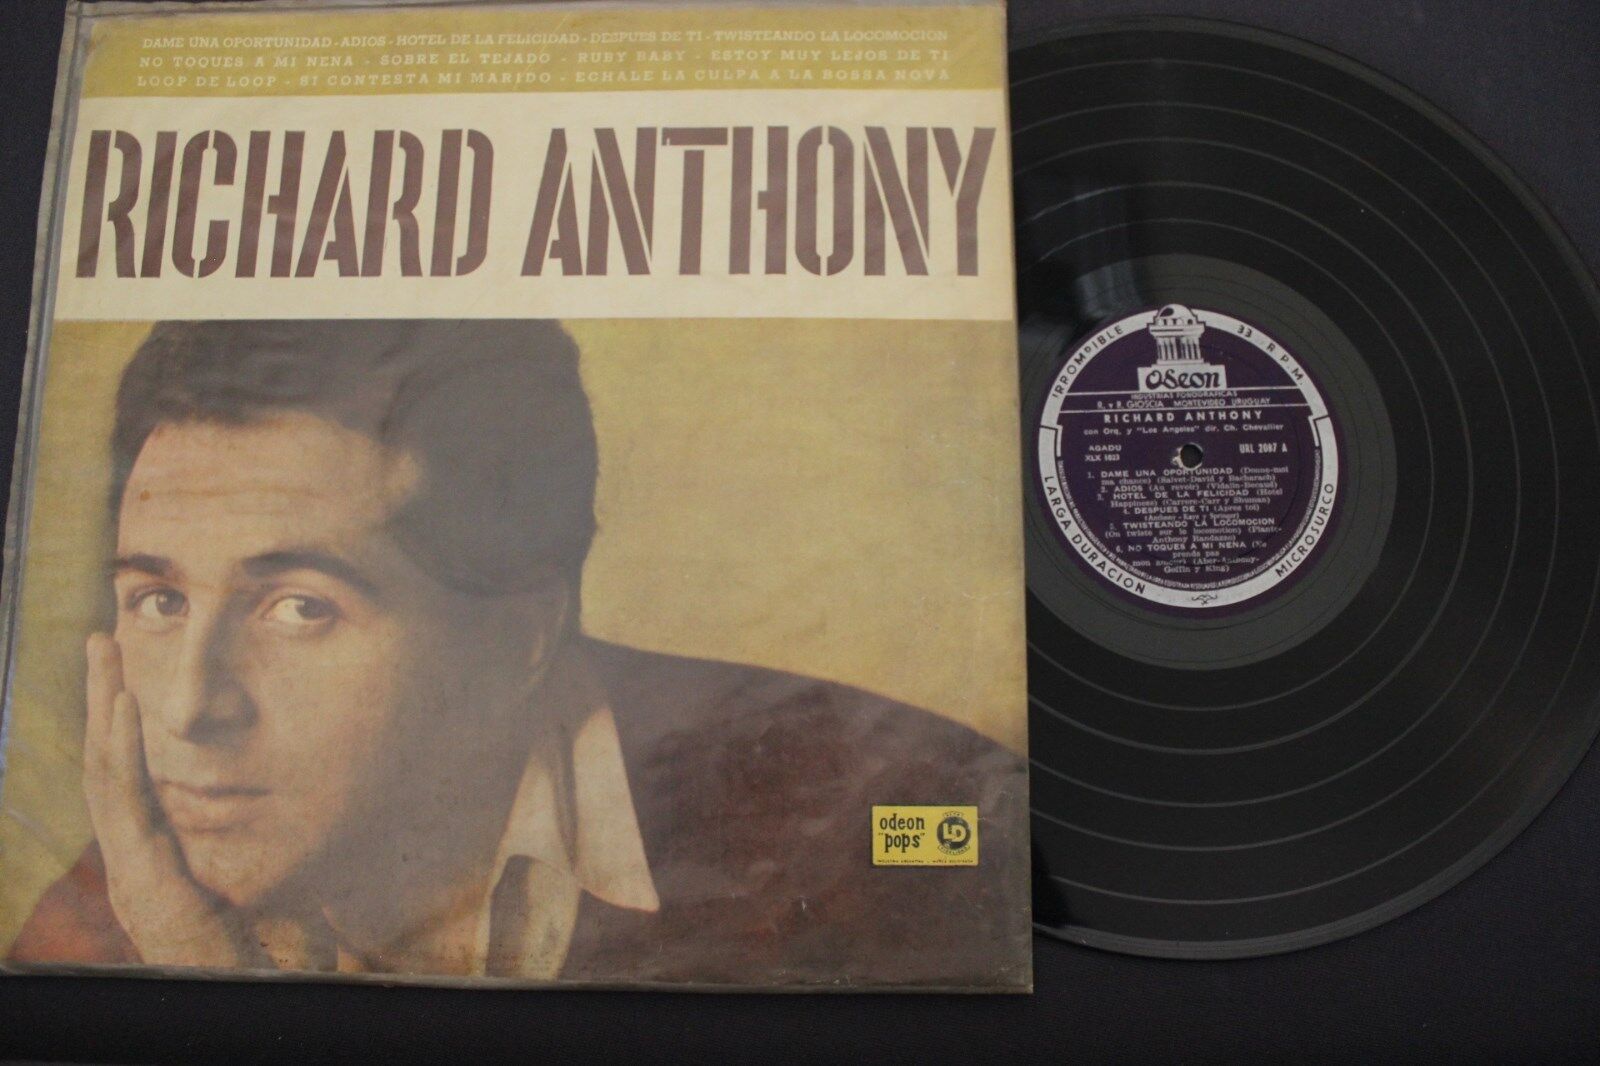 RICHARD ANTHONY - DAME UNA OPORTUNIDAD - ODEON RECORD - URL 2087 - RELEASED 1963